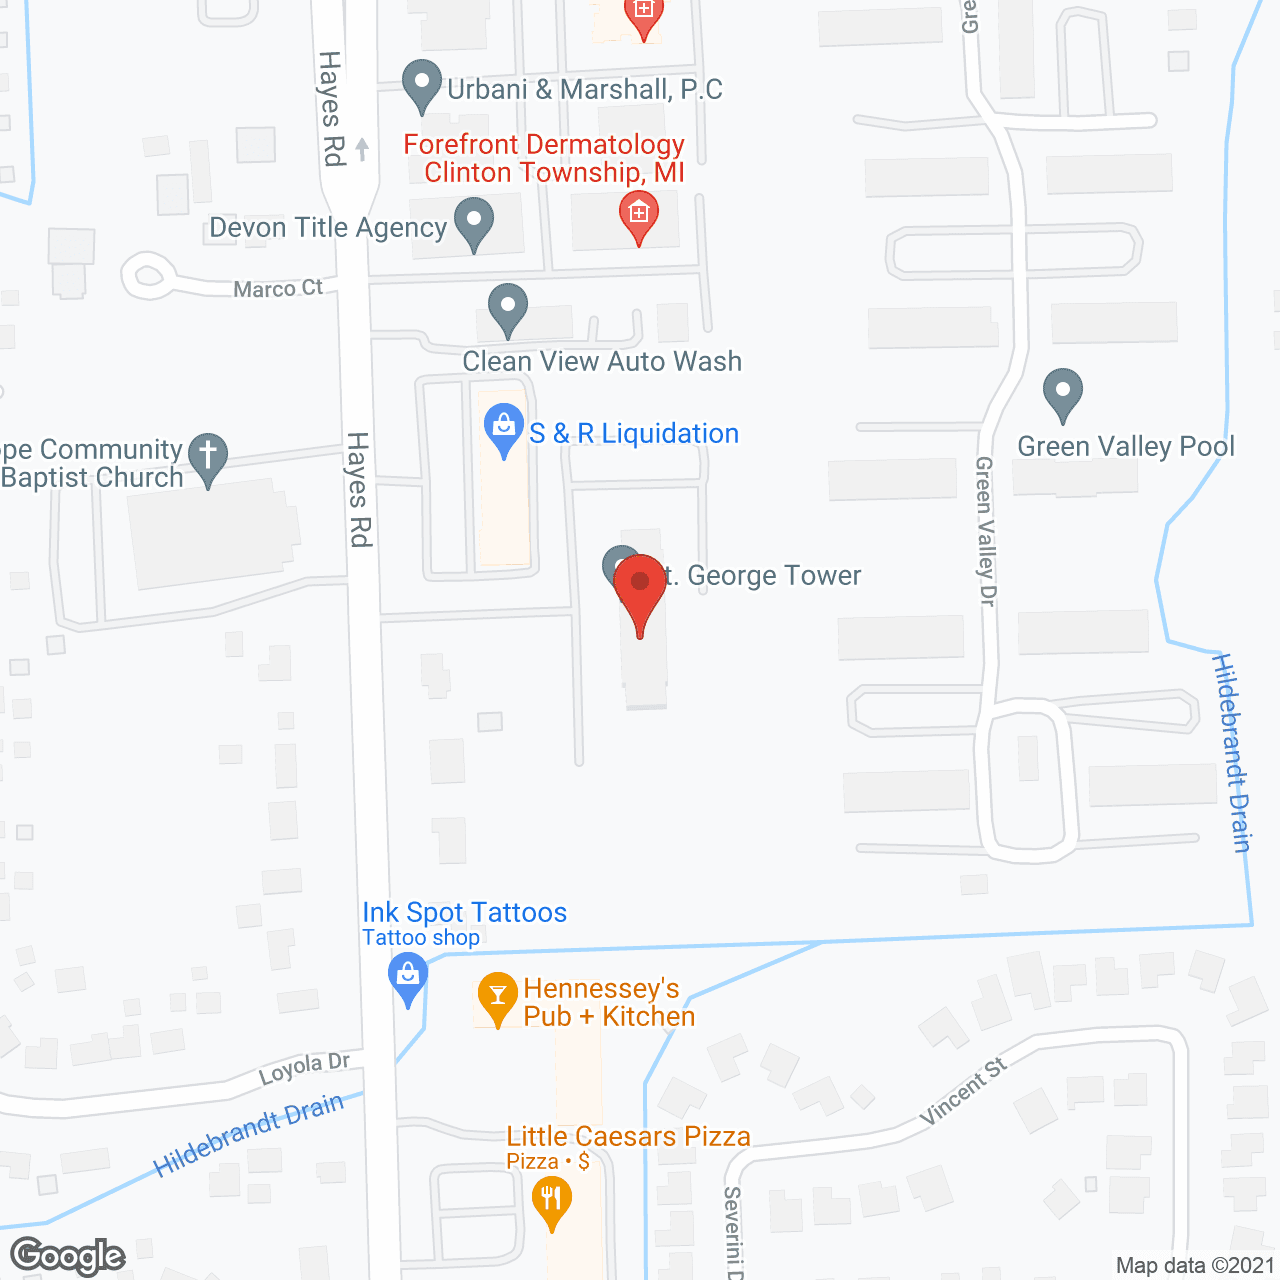 St George Tower in google map